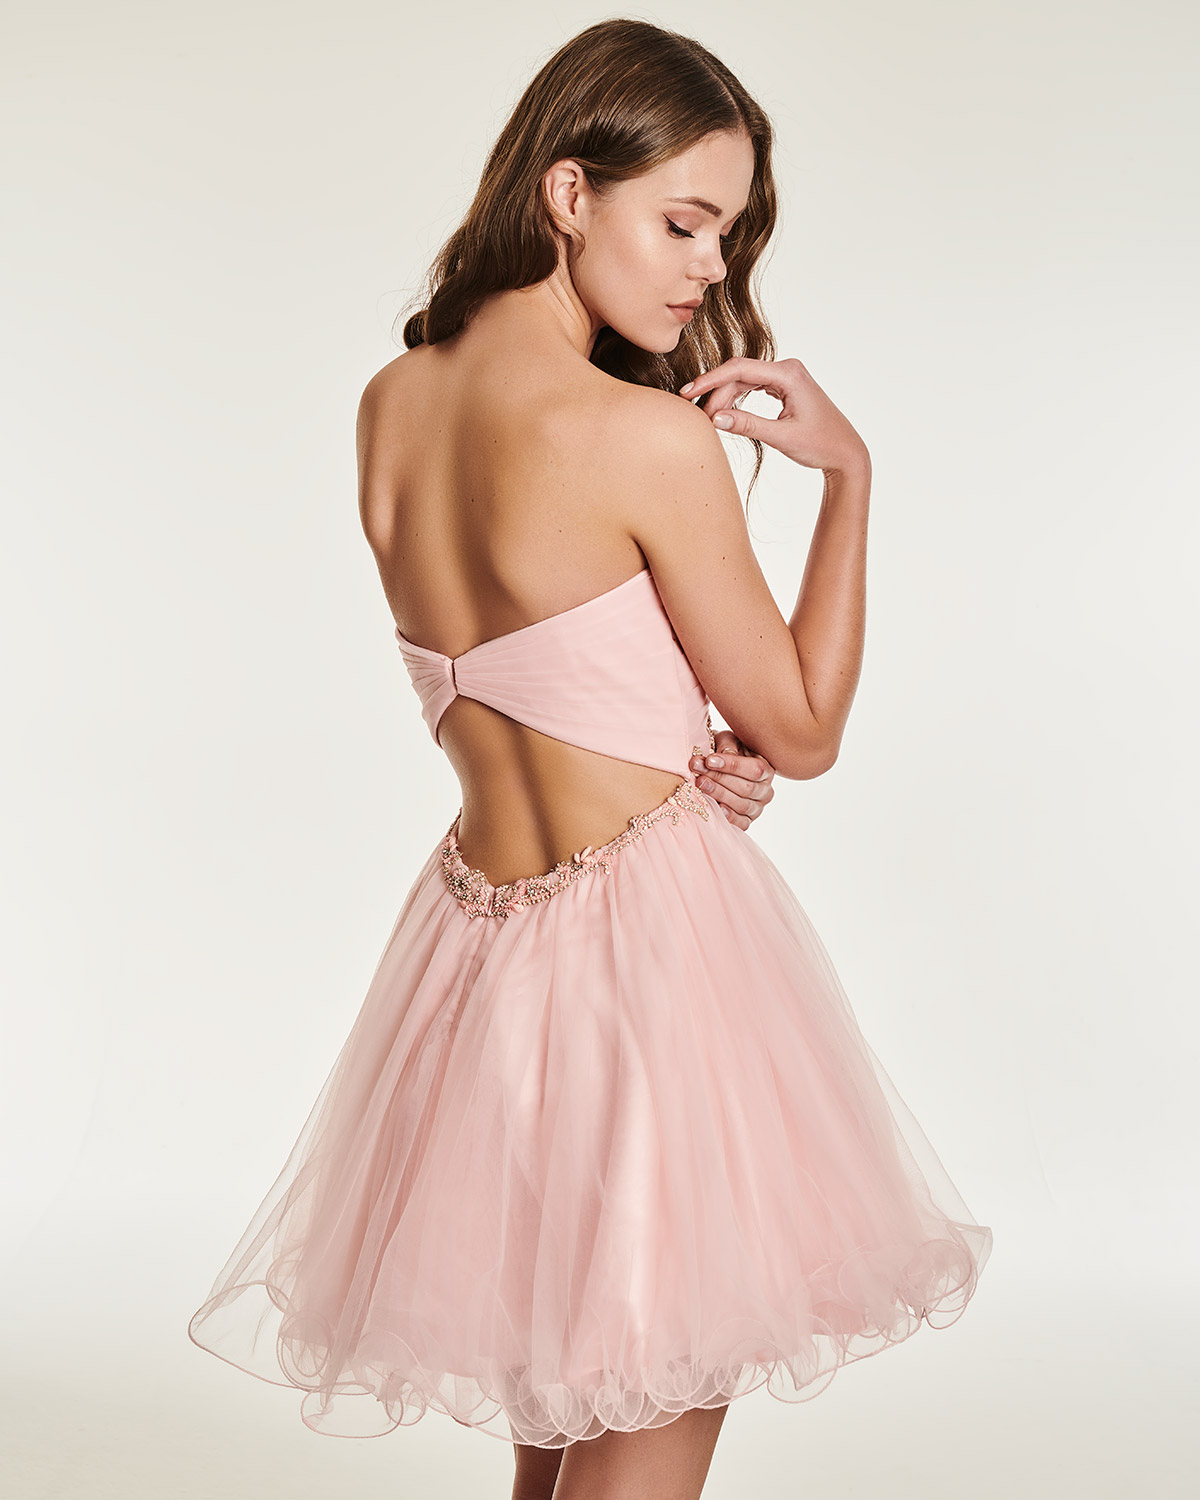 Cocktail Dresses / Short cocktail strapless dress with tulle and beading